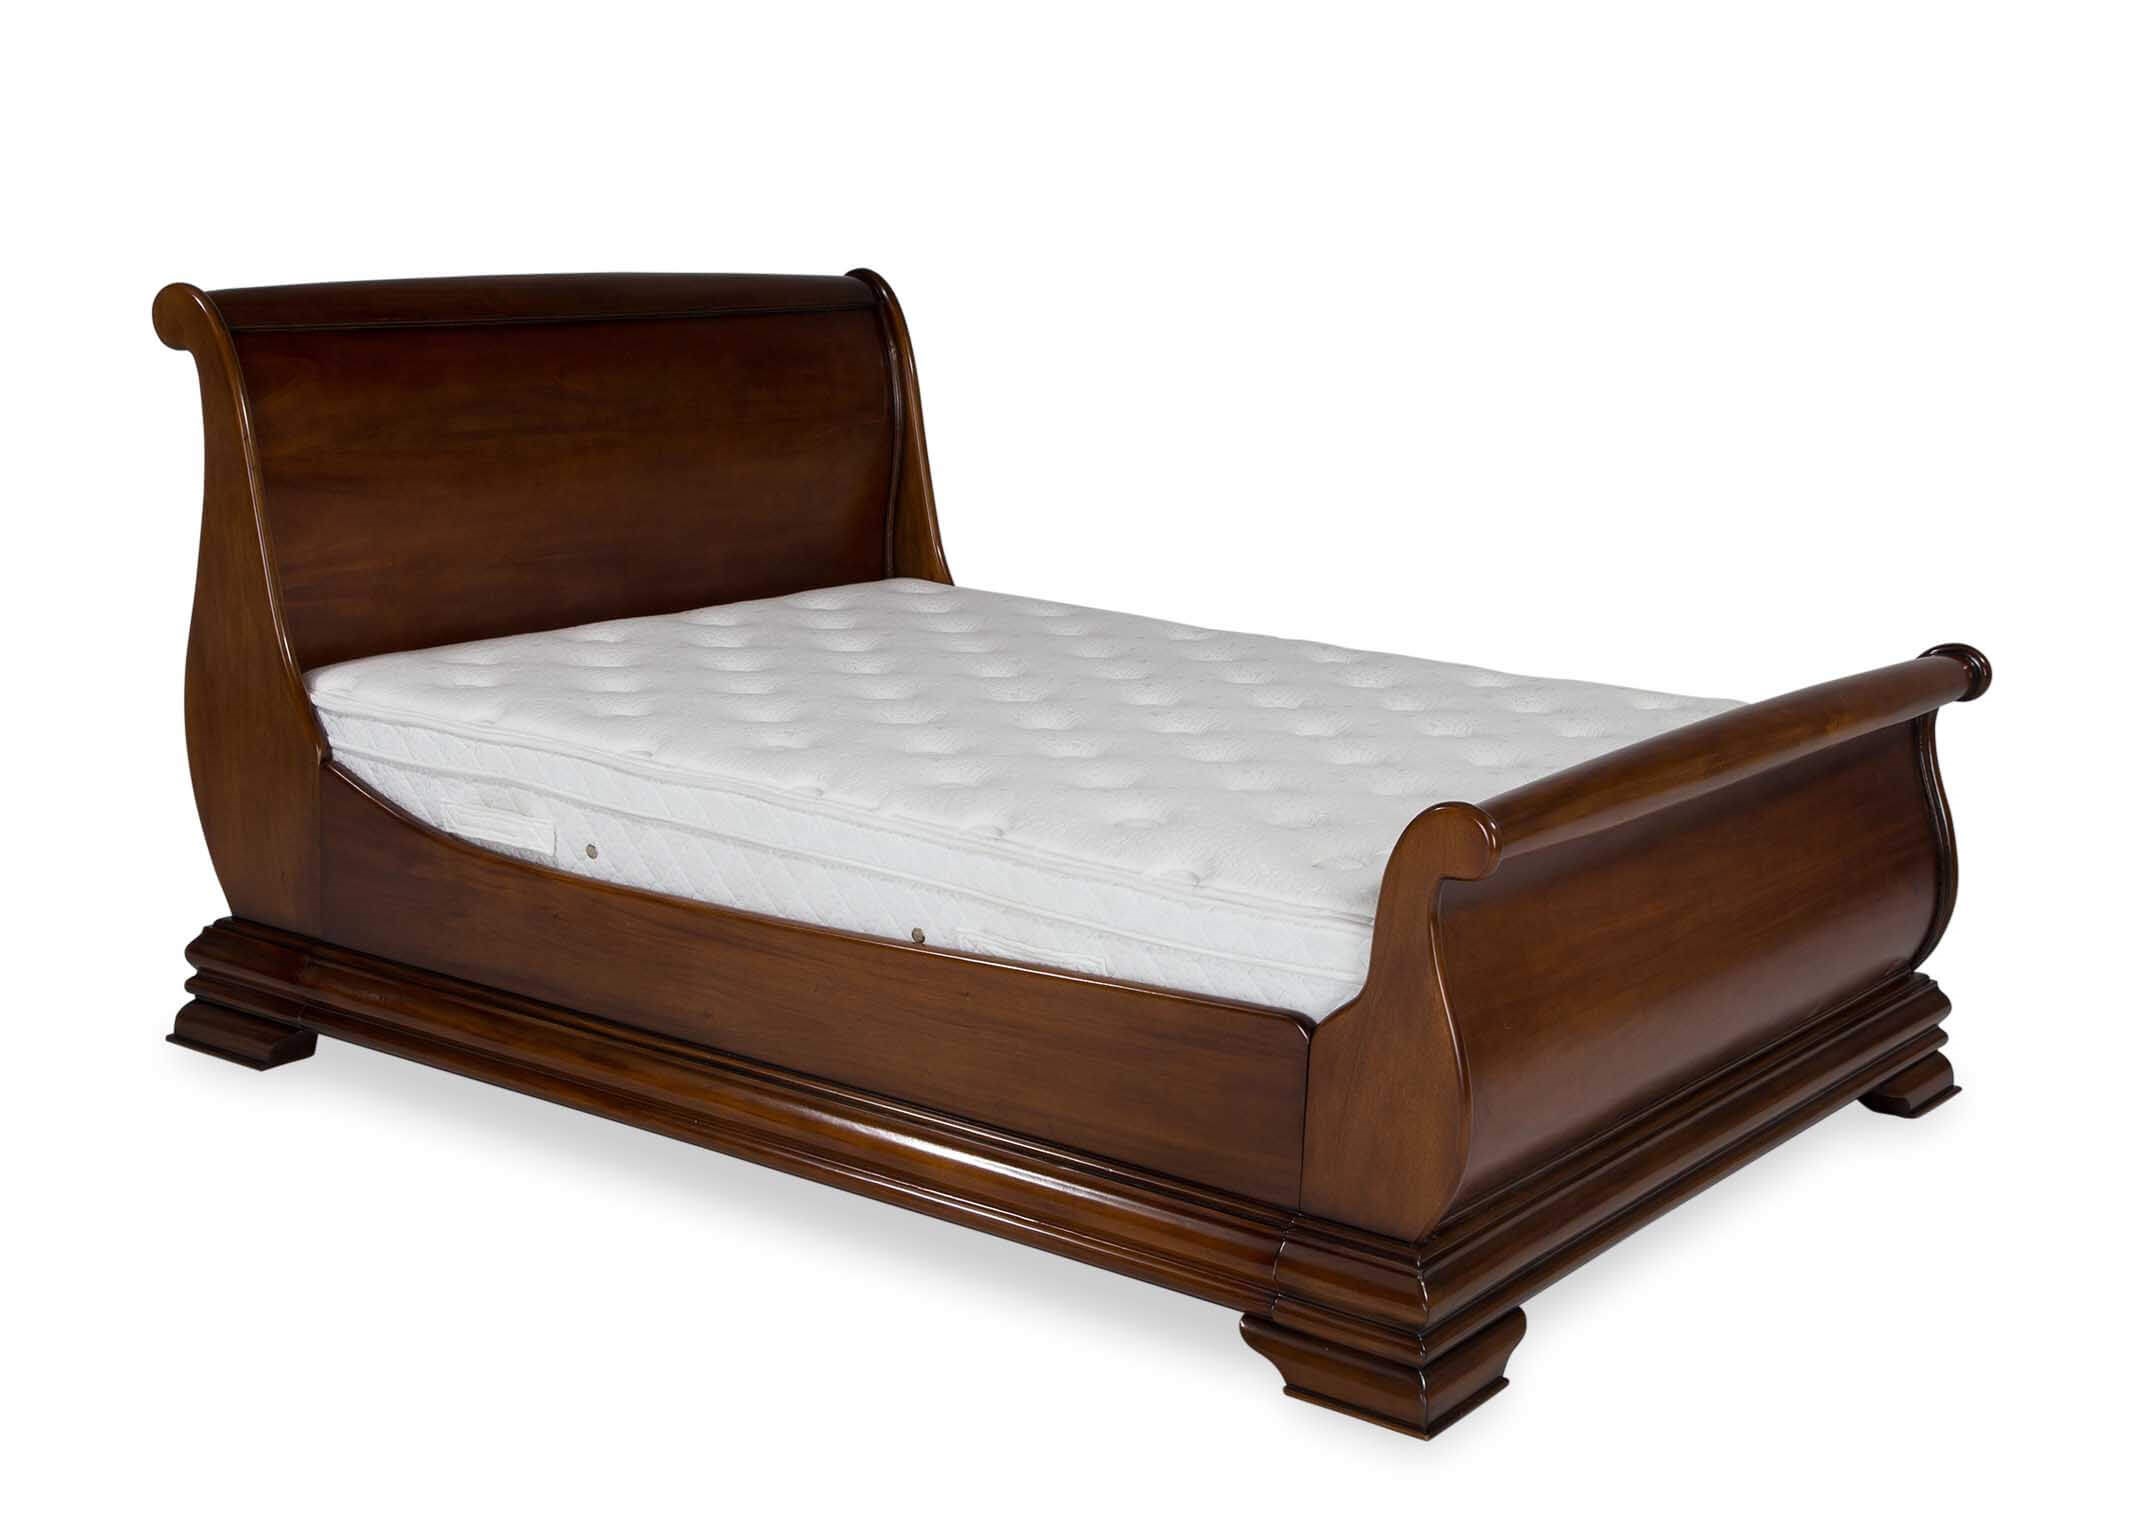 6 Ft Mahogany Bed Frame La Roce, Solid Wood Sleigh Bed Super King Size Mattress